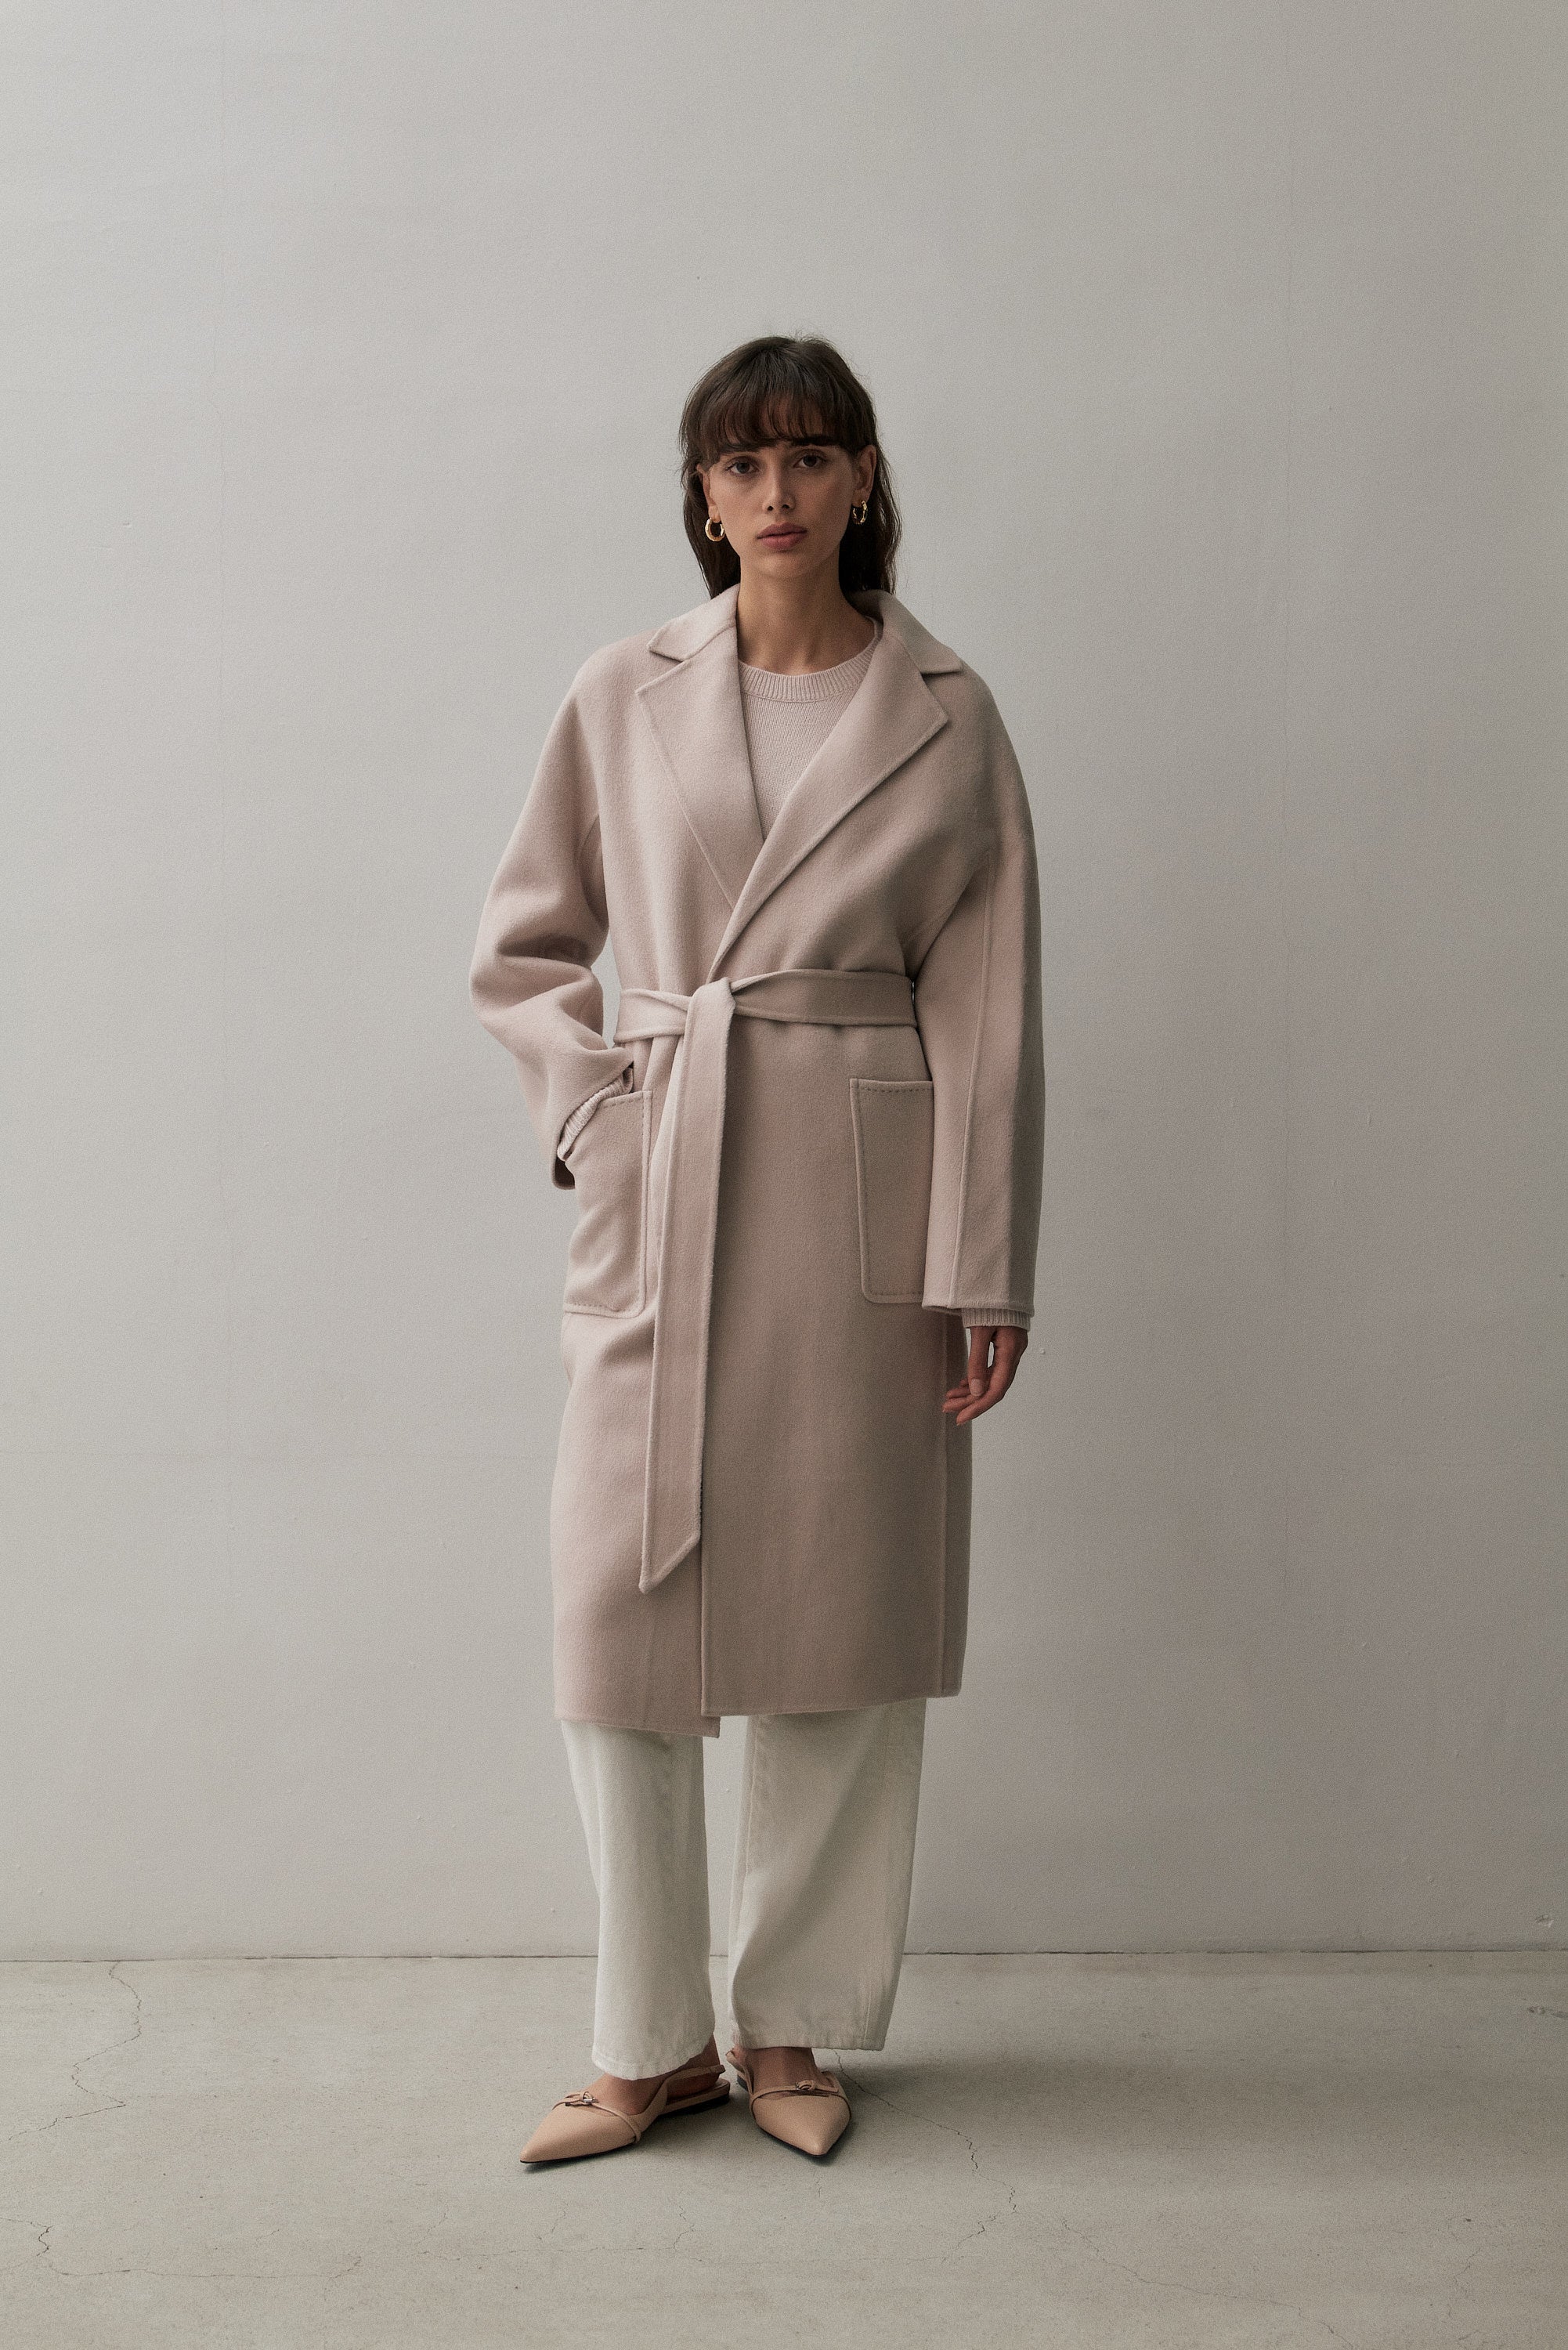 THE CLASSIC COAT - CHOCOLATE MELANGE – THE CURATED